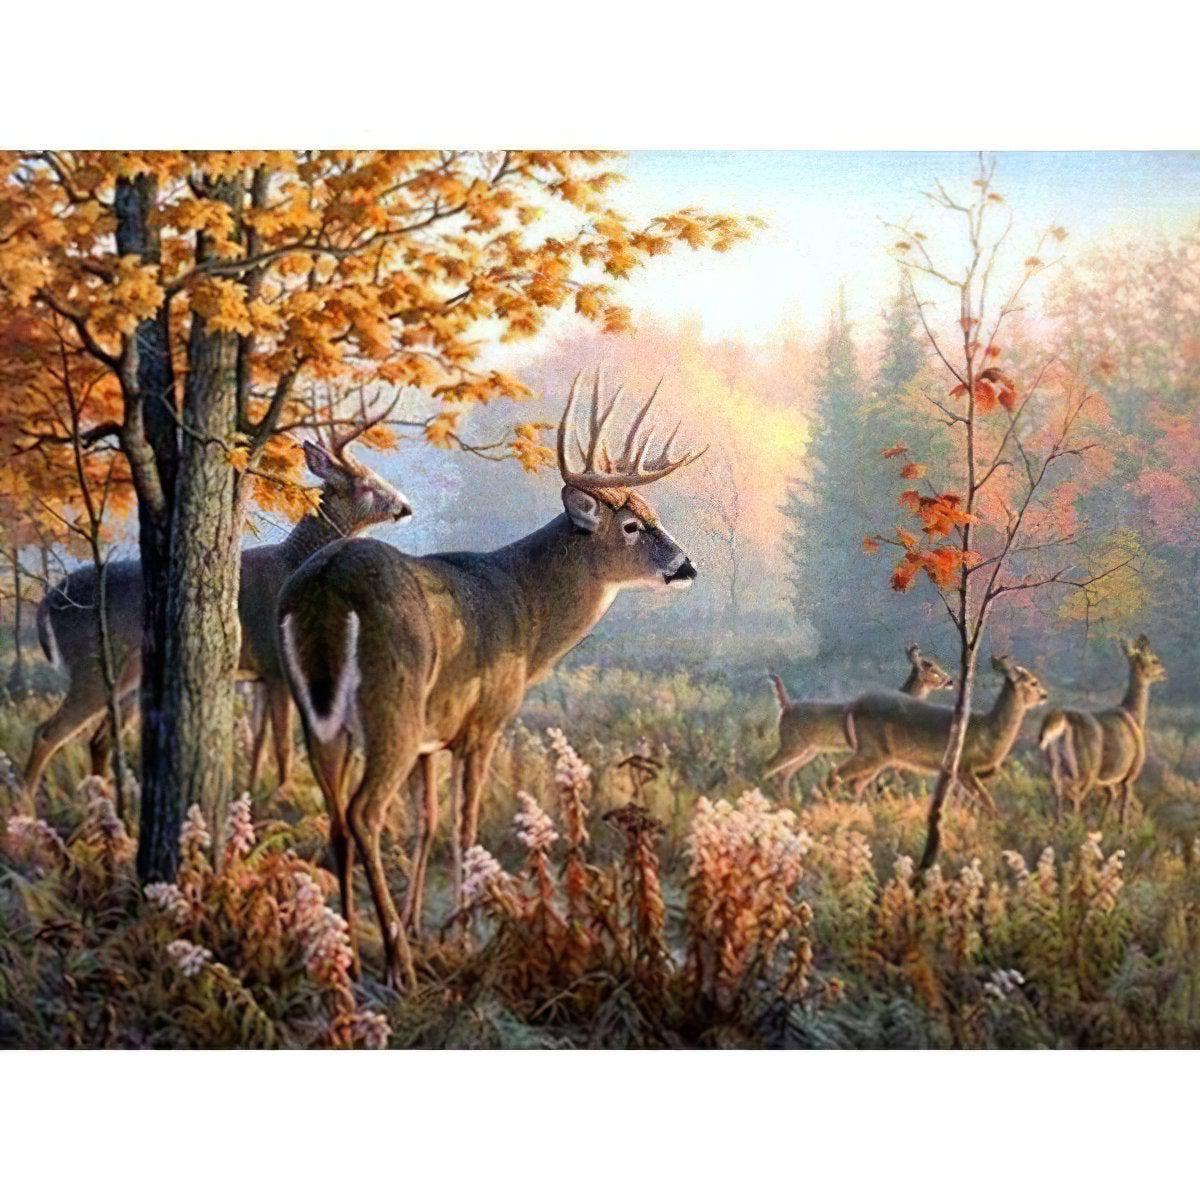 Explore tranquility with Deer And Forest art.Deer And Forest - Diamondartlove